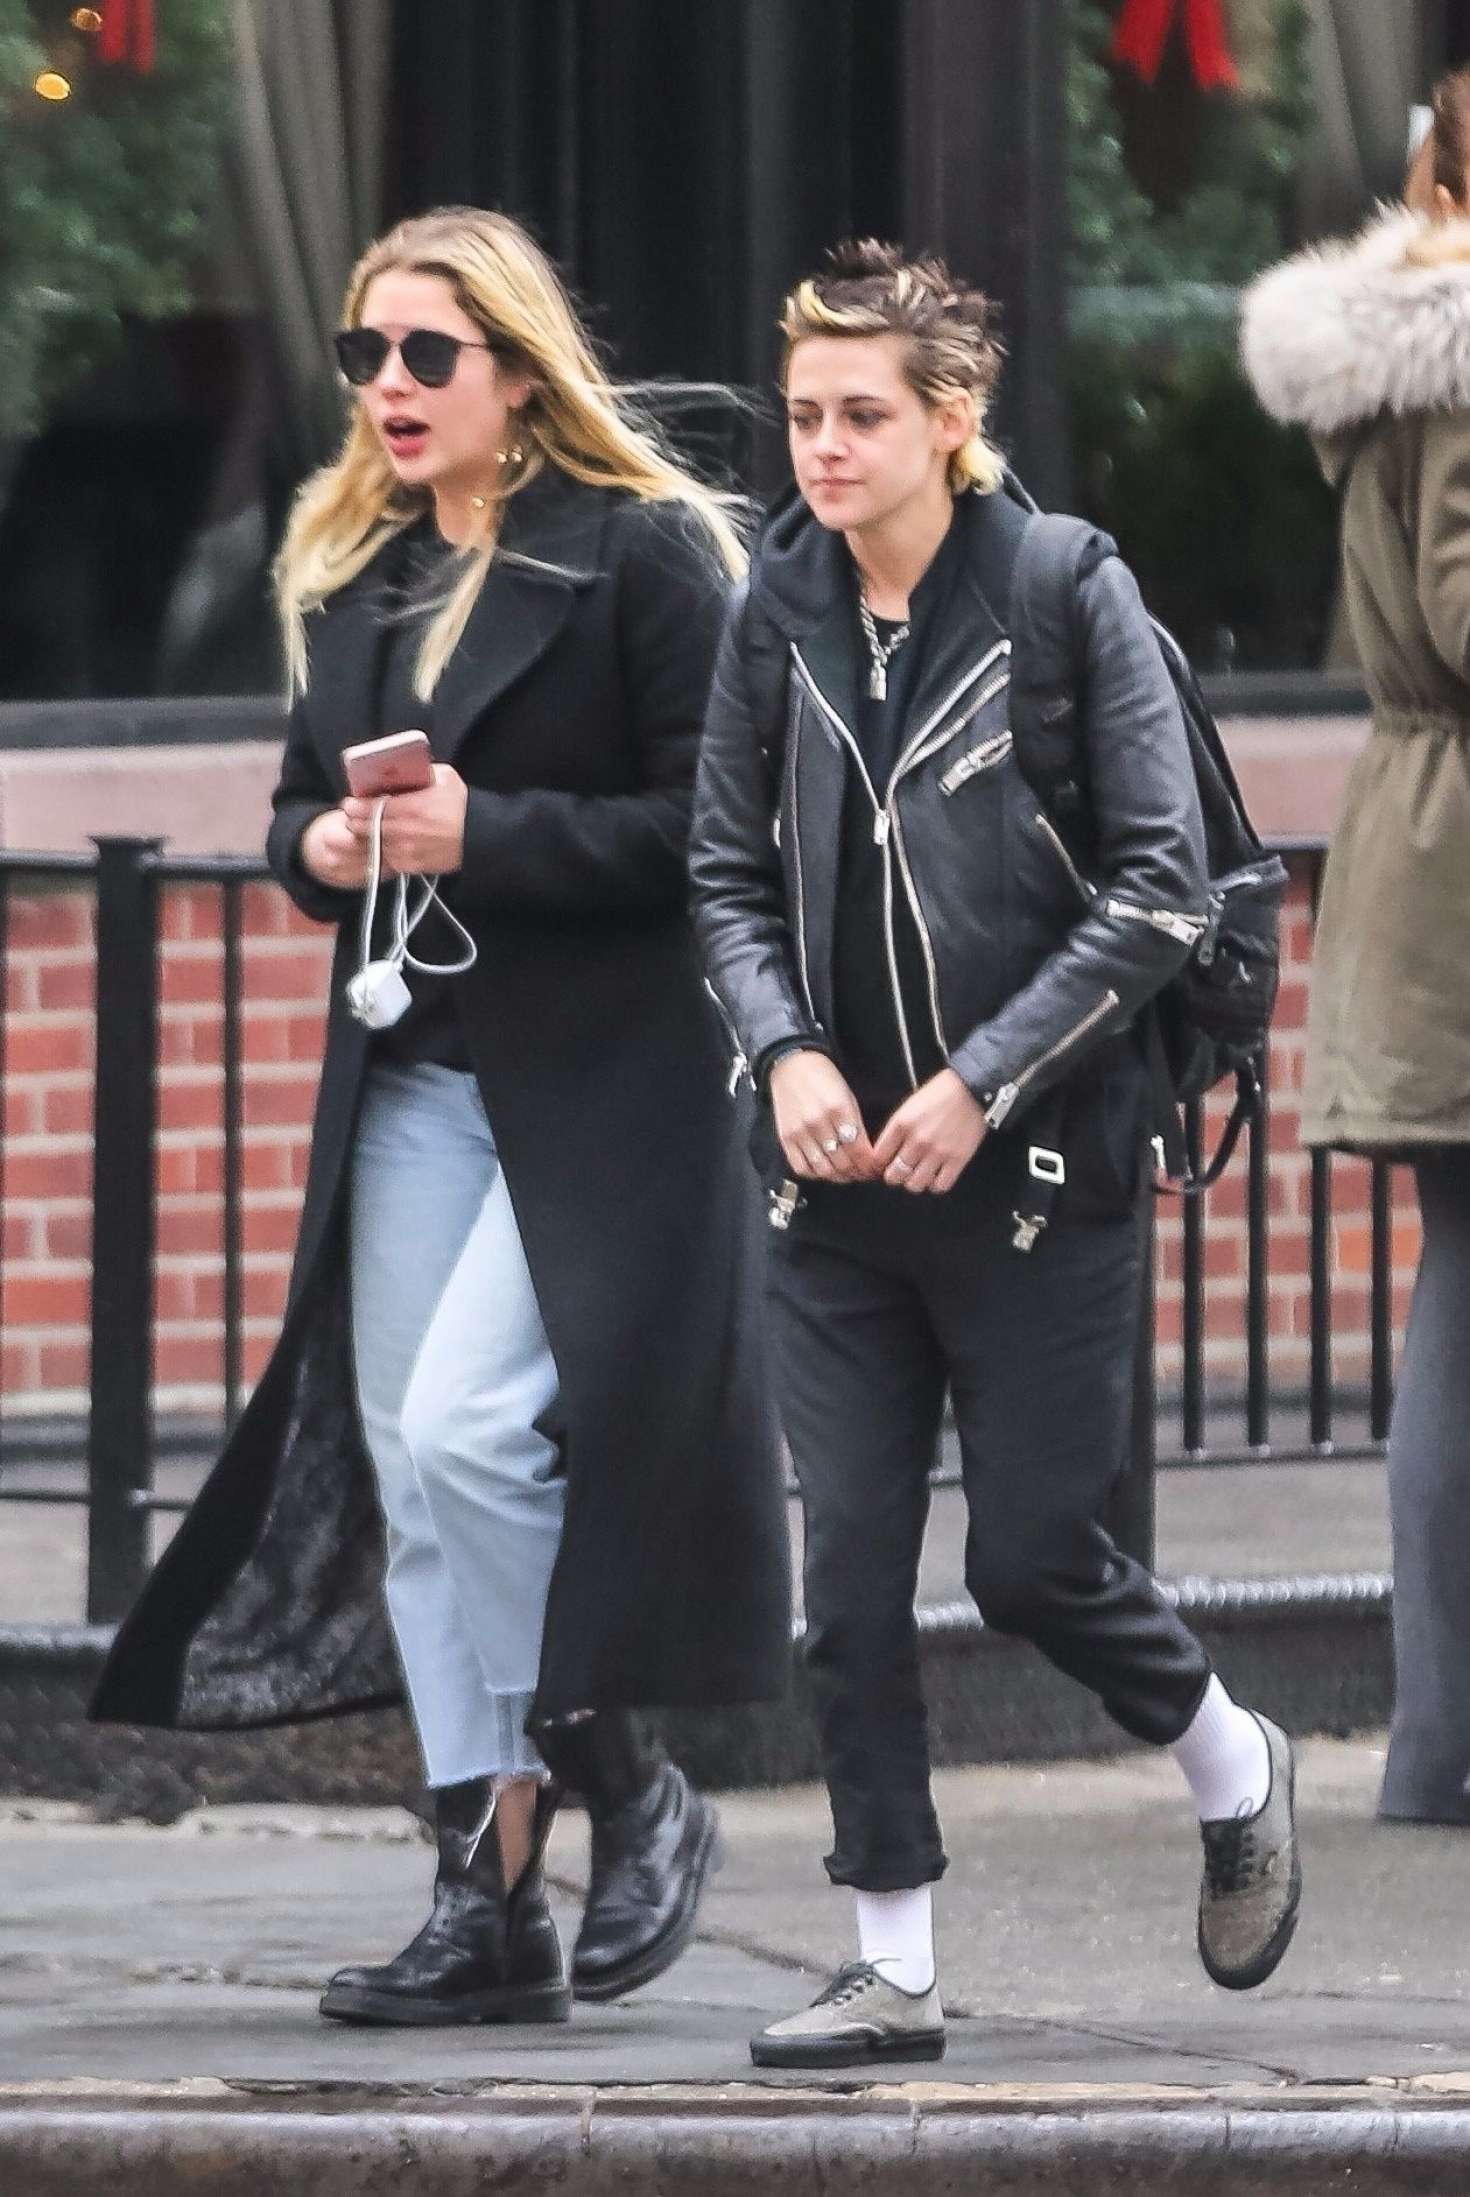 Ashley Benson and Kristen Stewart out together in NYC -33 | GotCeleb